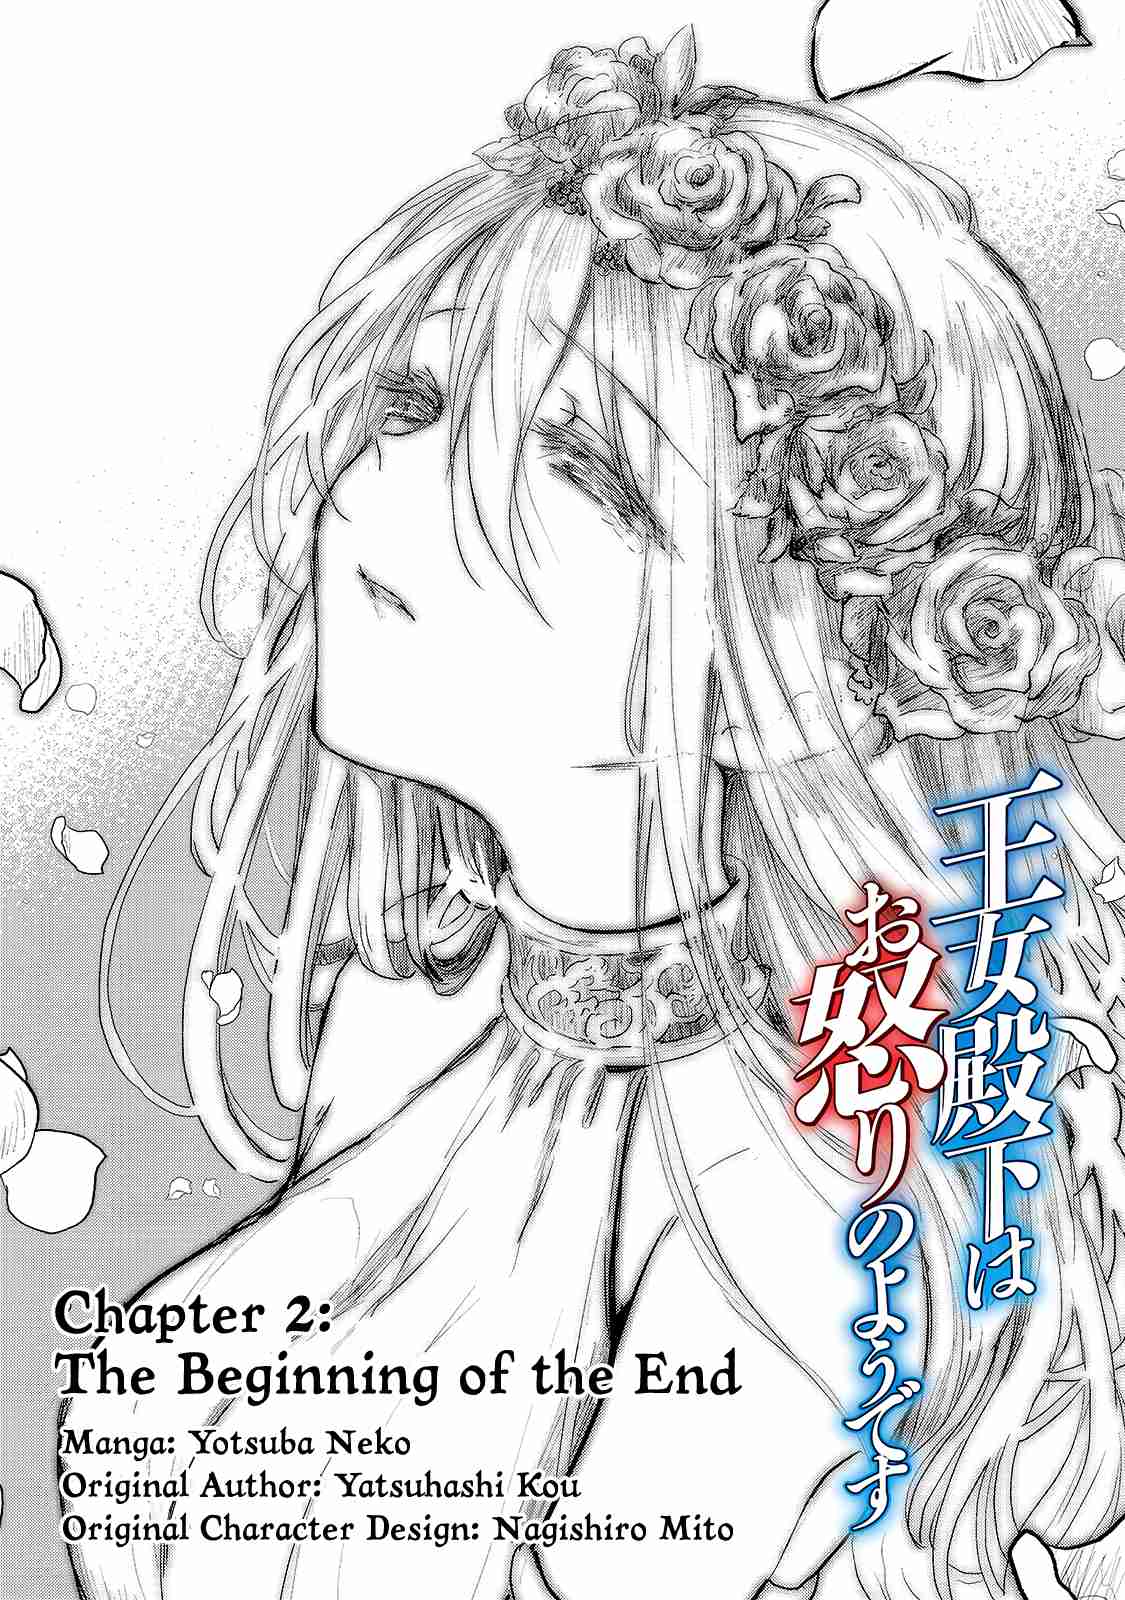 Her Royal Highness Seems to be Angry. Ch. 2 The Beginning of the End